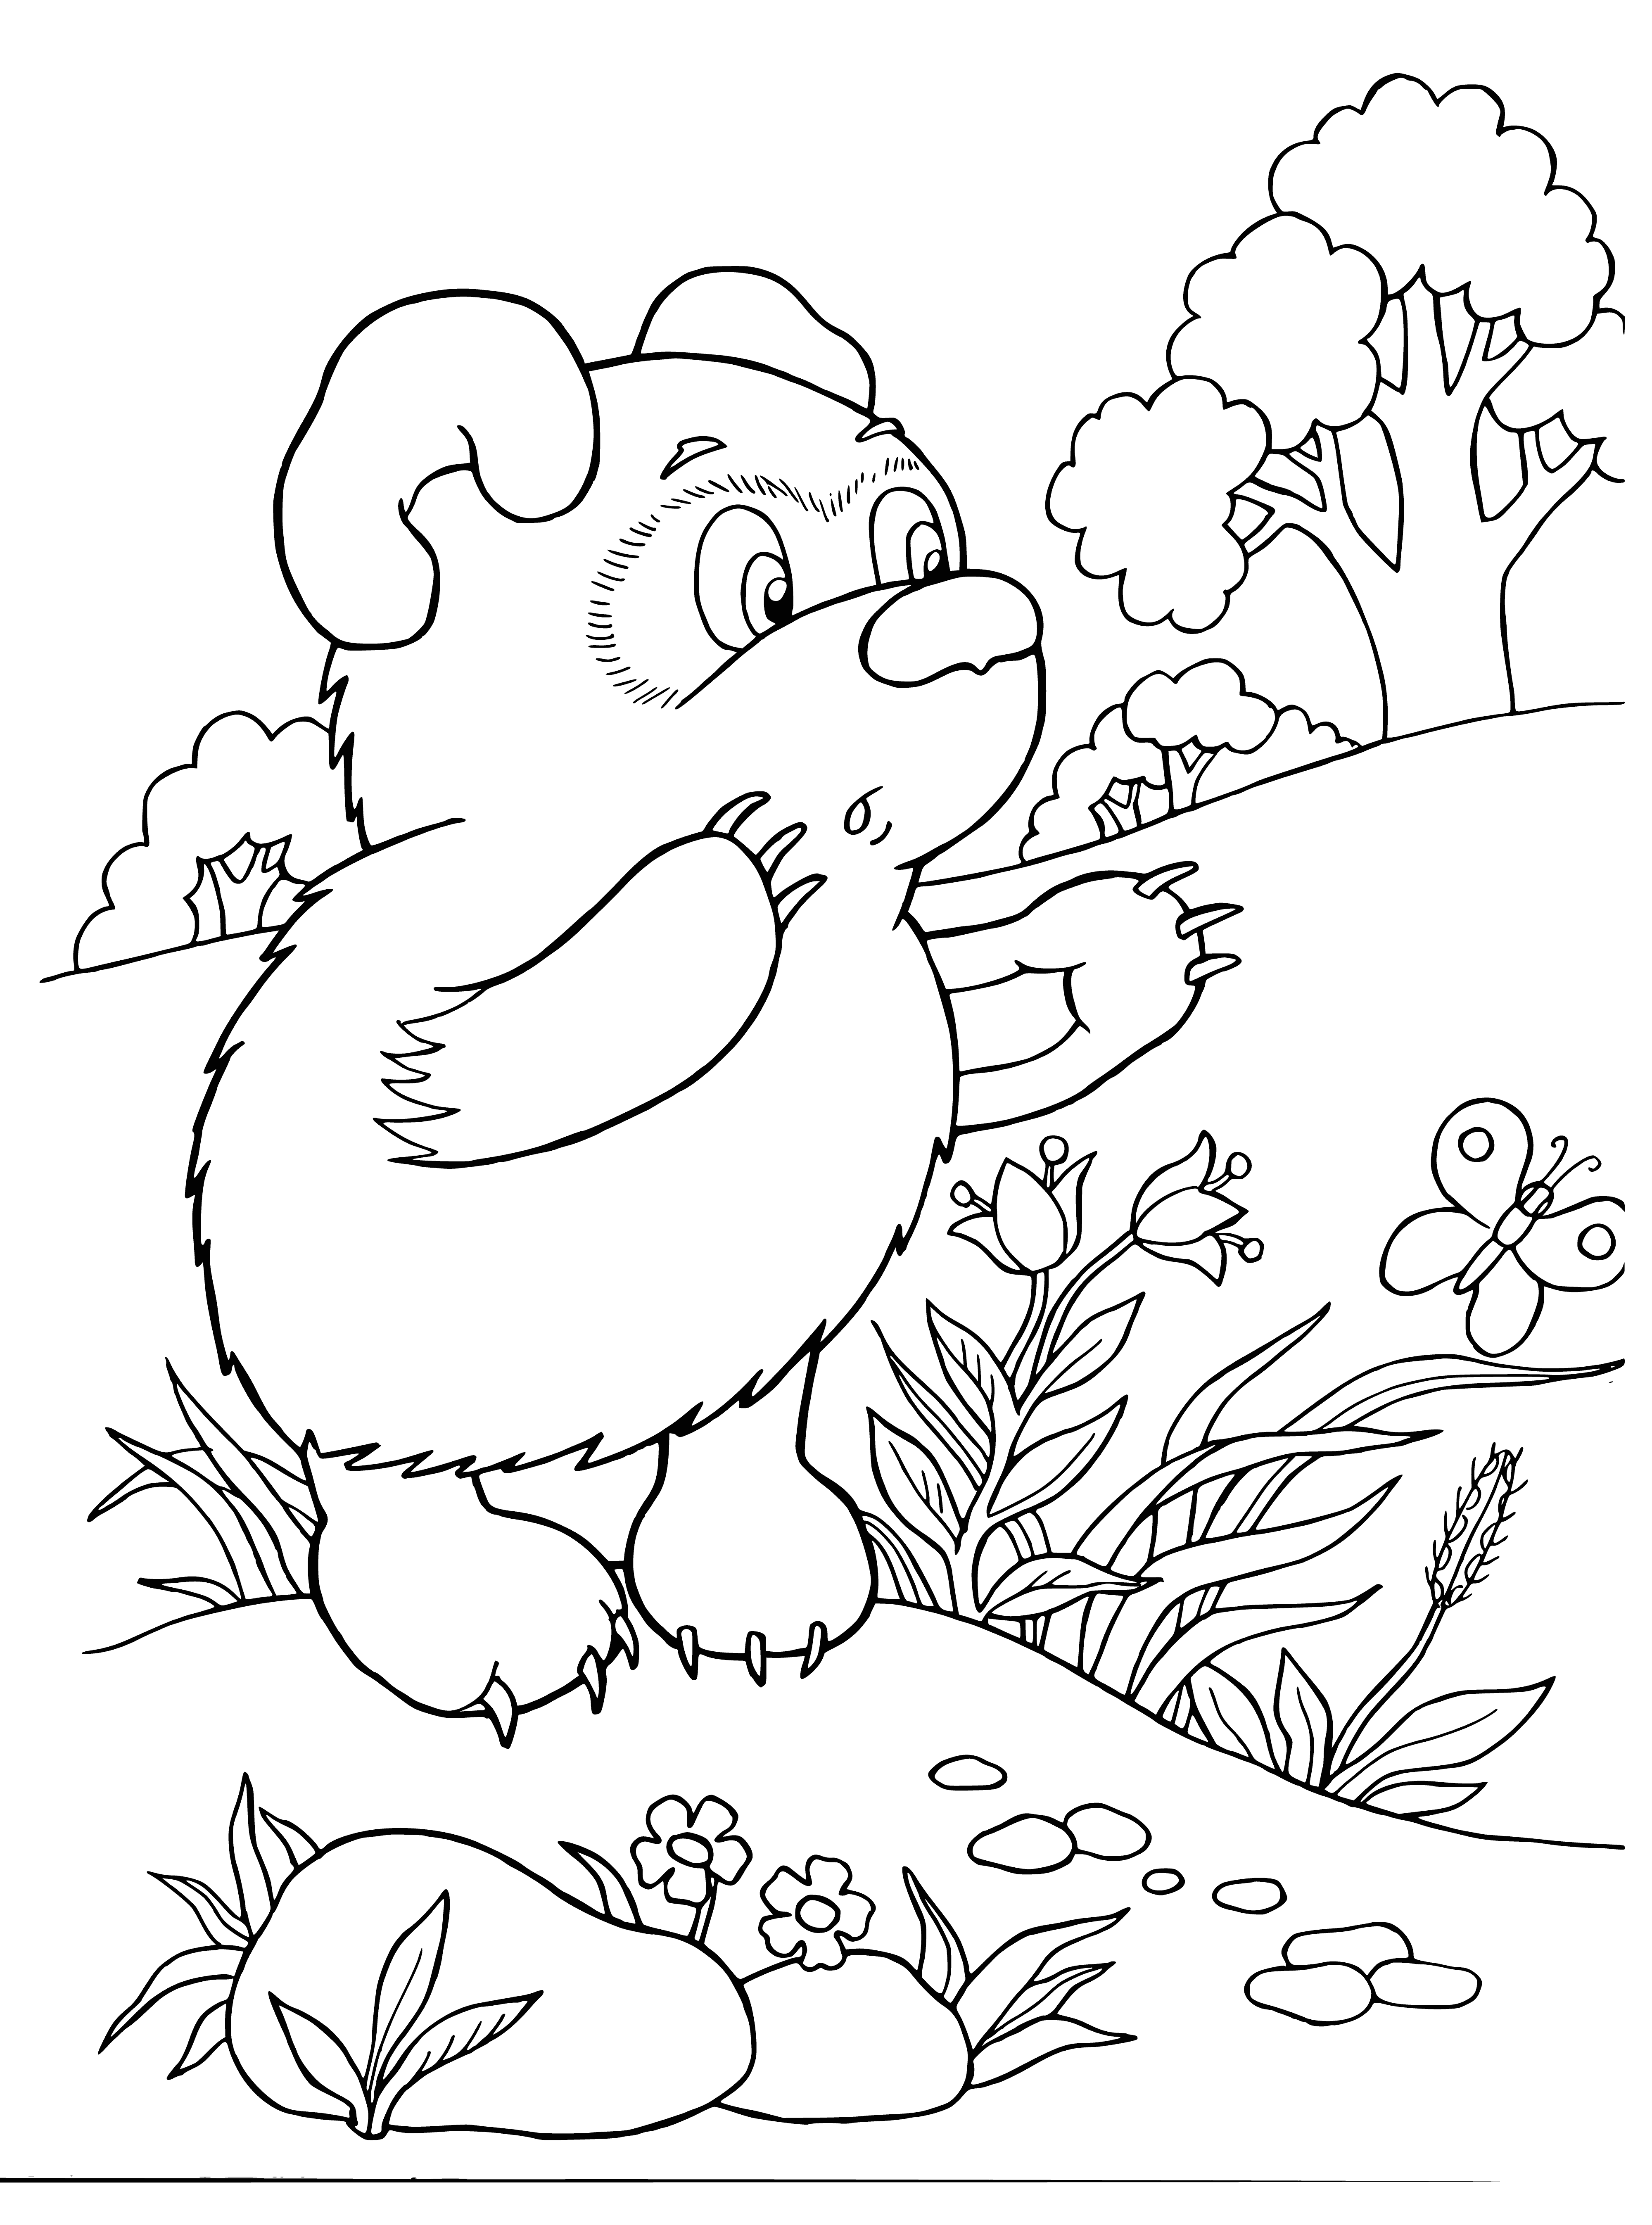 coloring page: A large yellow bear wearing a red sweater with a "T" holds a red balloon, surrounded by a bee's nest, tree, and blue bird.